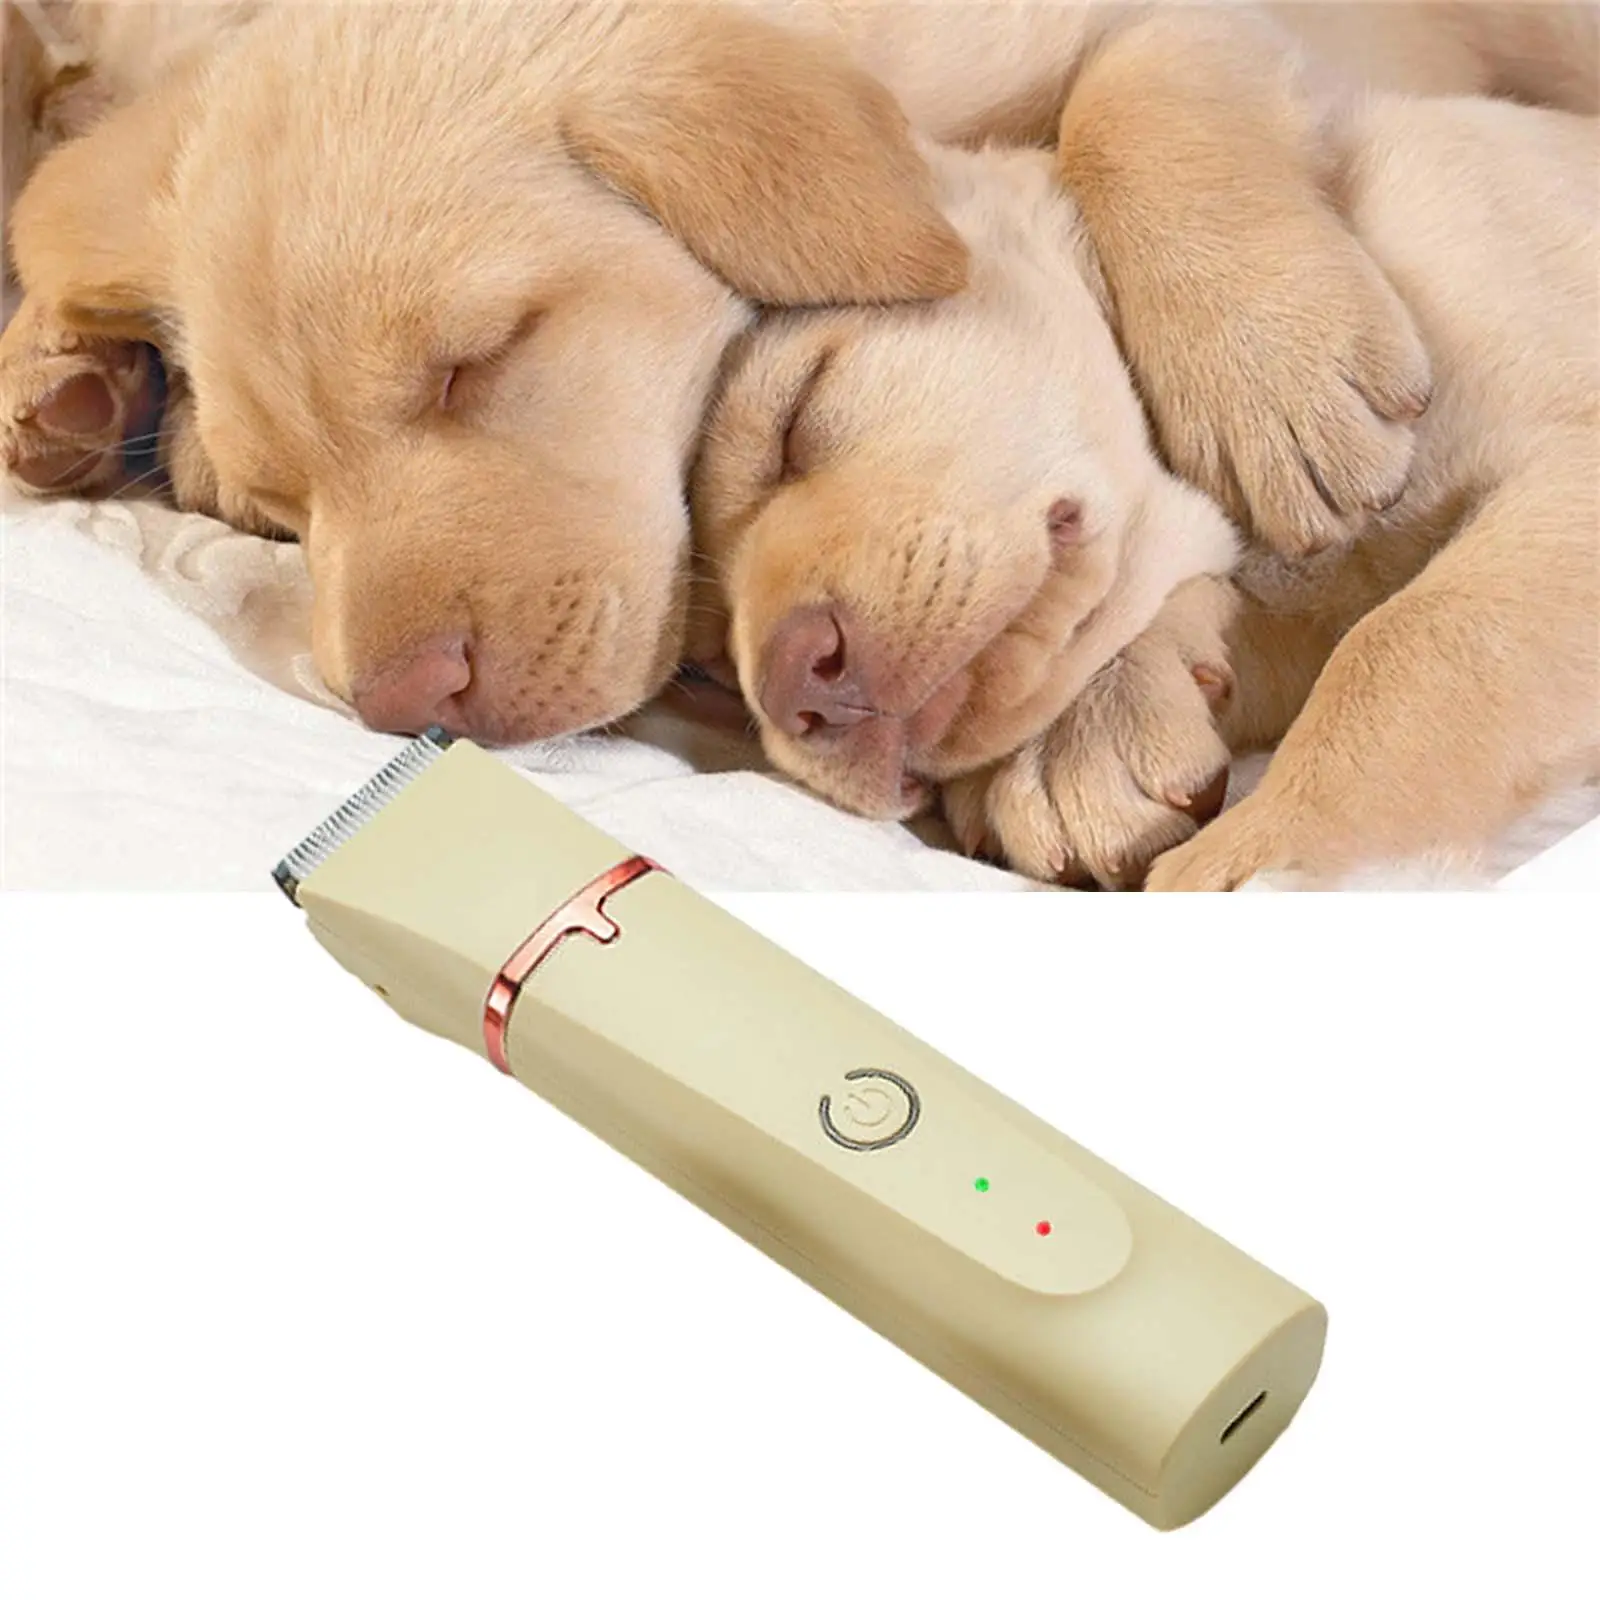 Dog Clipper Low Noise Portable Quiet Pet Hair Trimmer for Ears Paws Indoor